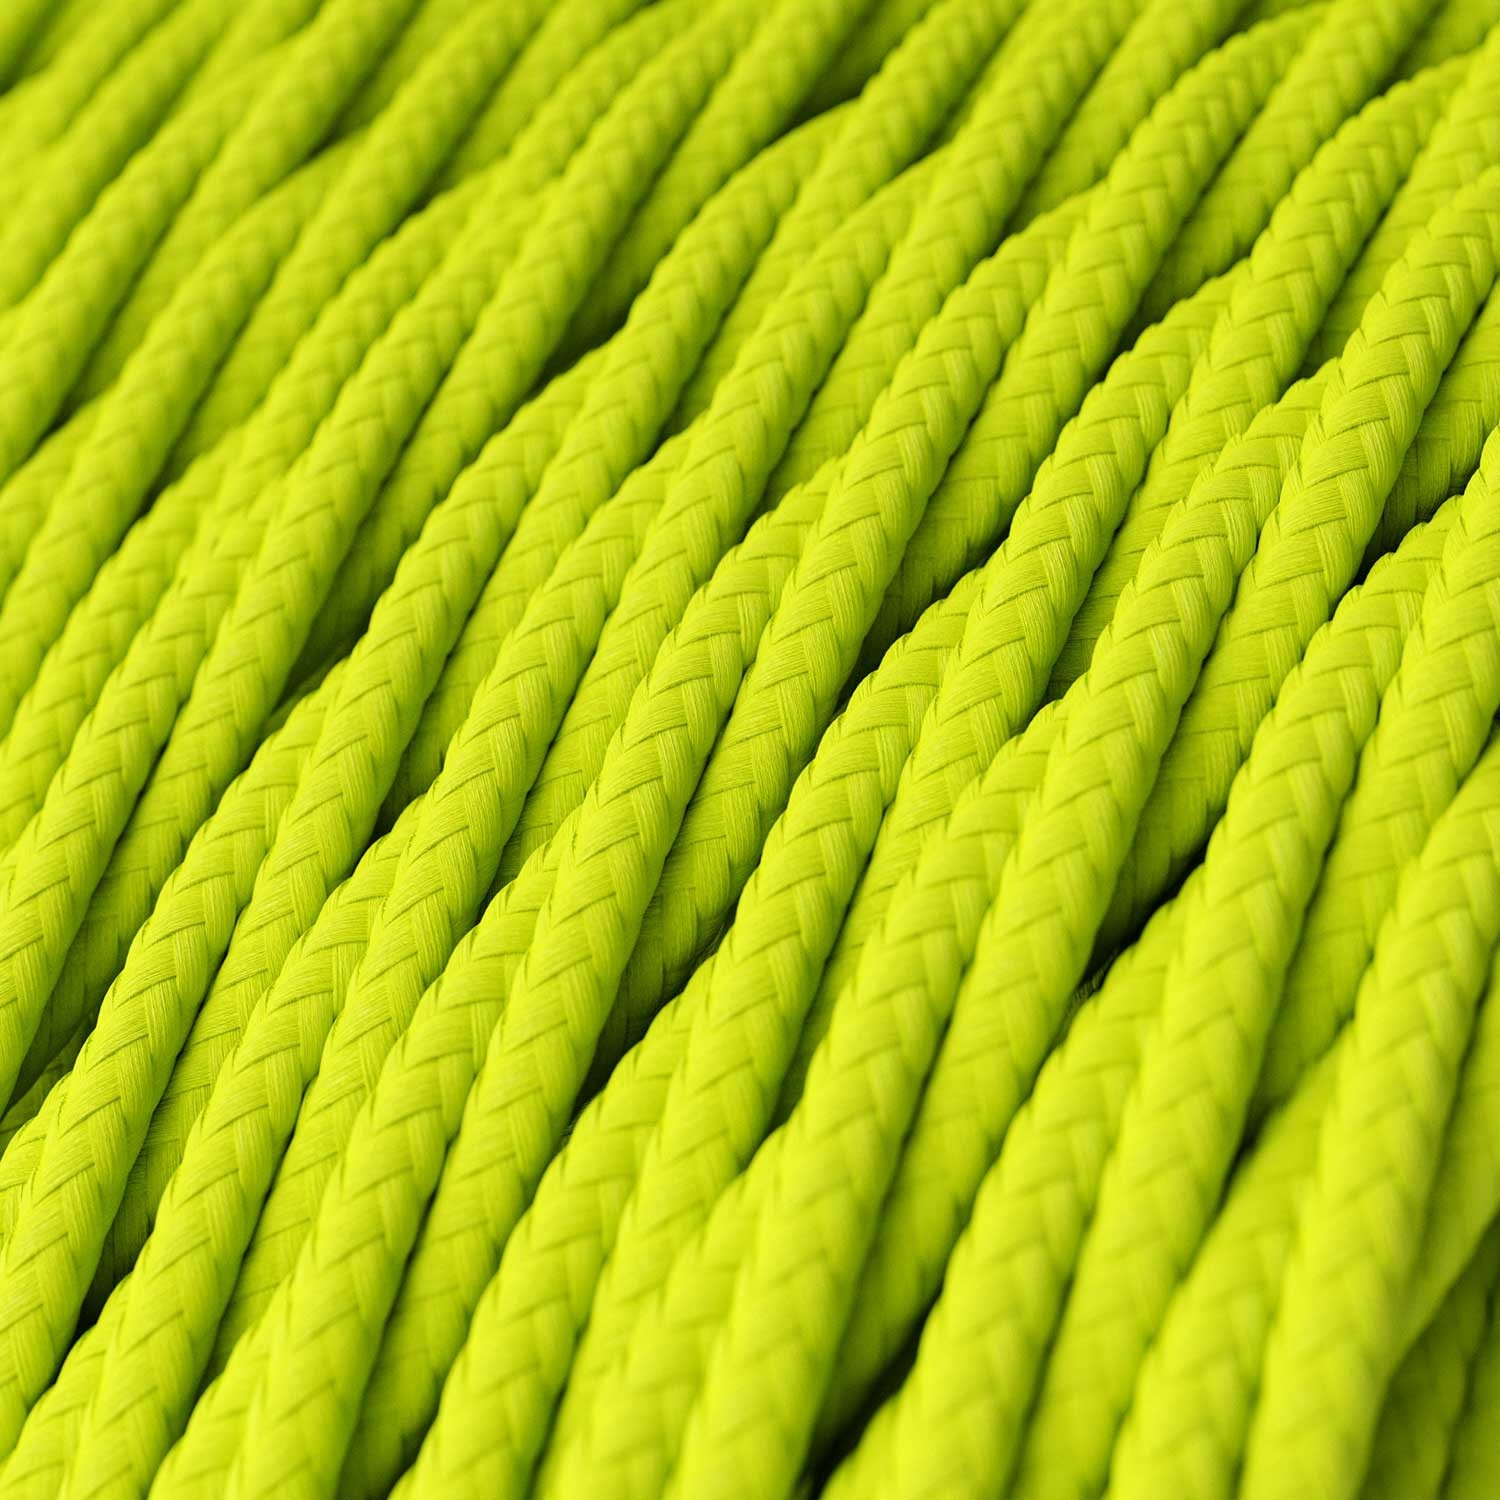 TF10 Neon Yellow Twisted Rayon Electrical Fabric Cloth Cord Cable